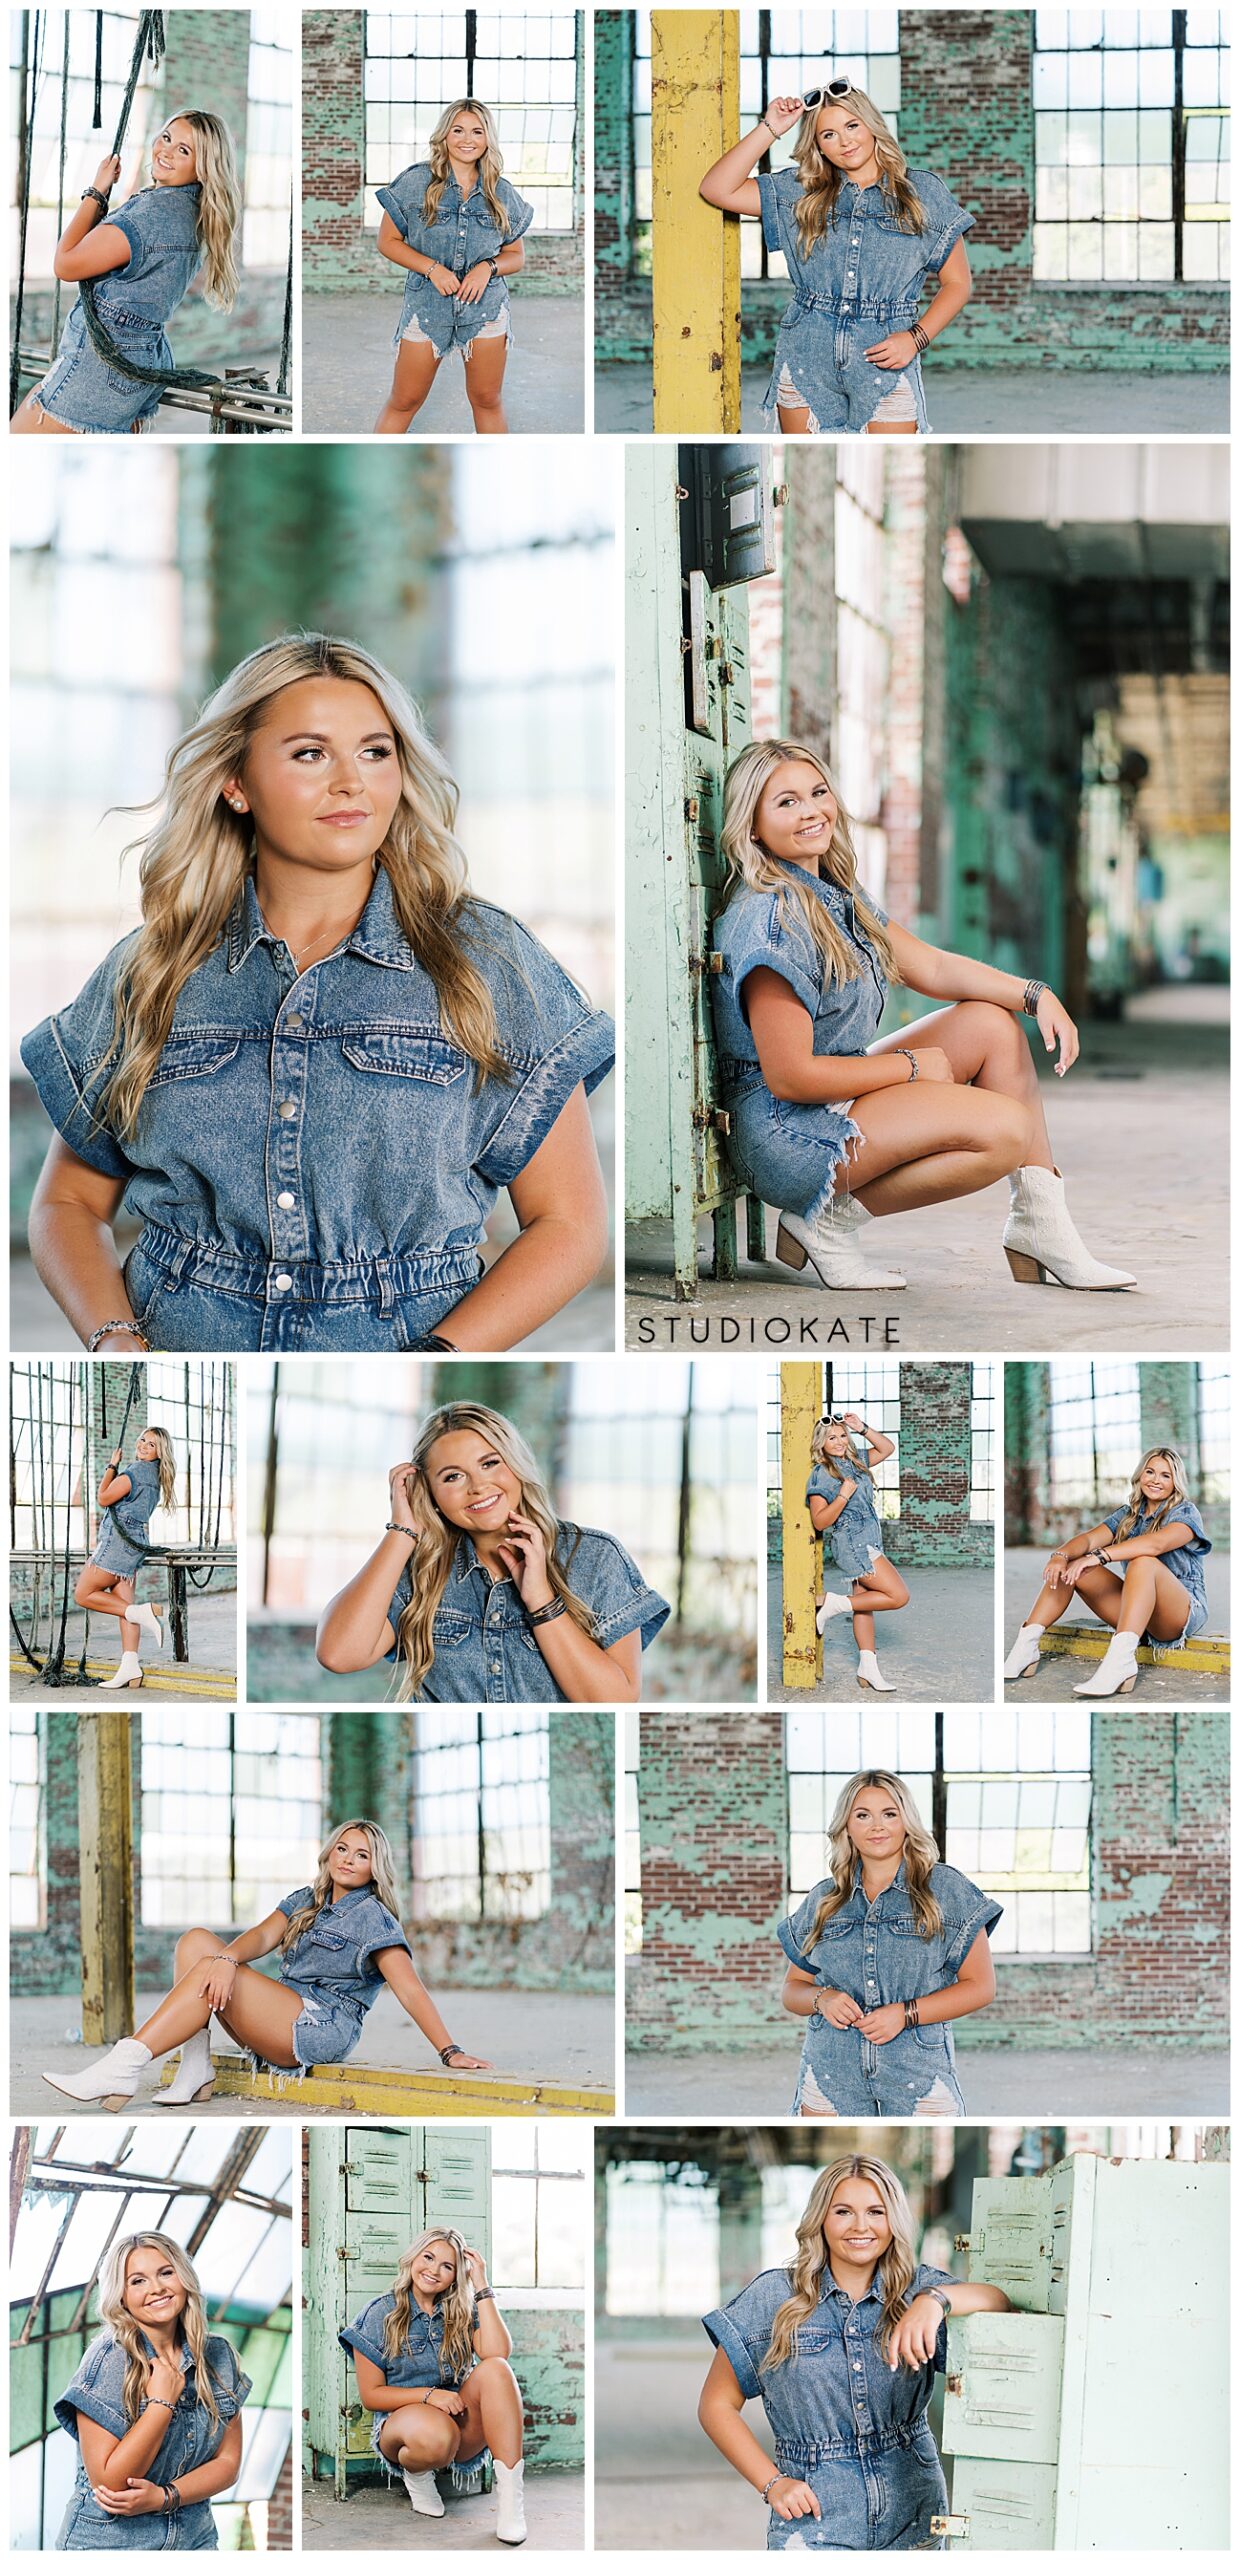 Lindale Mill, Model High School, Senior Pictures, Best Senior Photographer Near Me, Christian Heritage, Dalton Ga, What to wear for senior pictures, Darlington School, Senior Pictures in Rome Georgia, Studio Kate Seniors, Carrie underwood Style, Denim and Rhinestones outfit